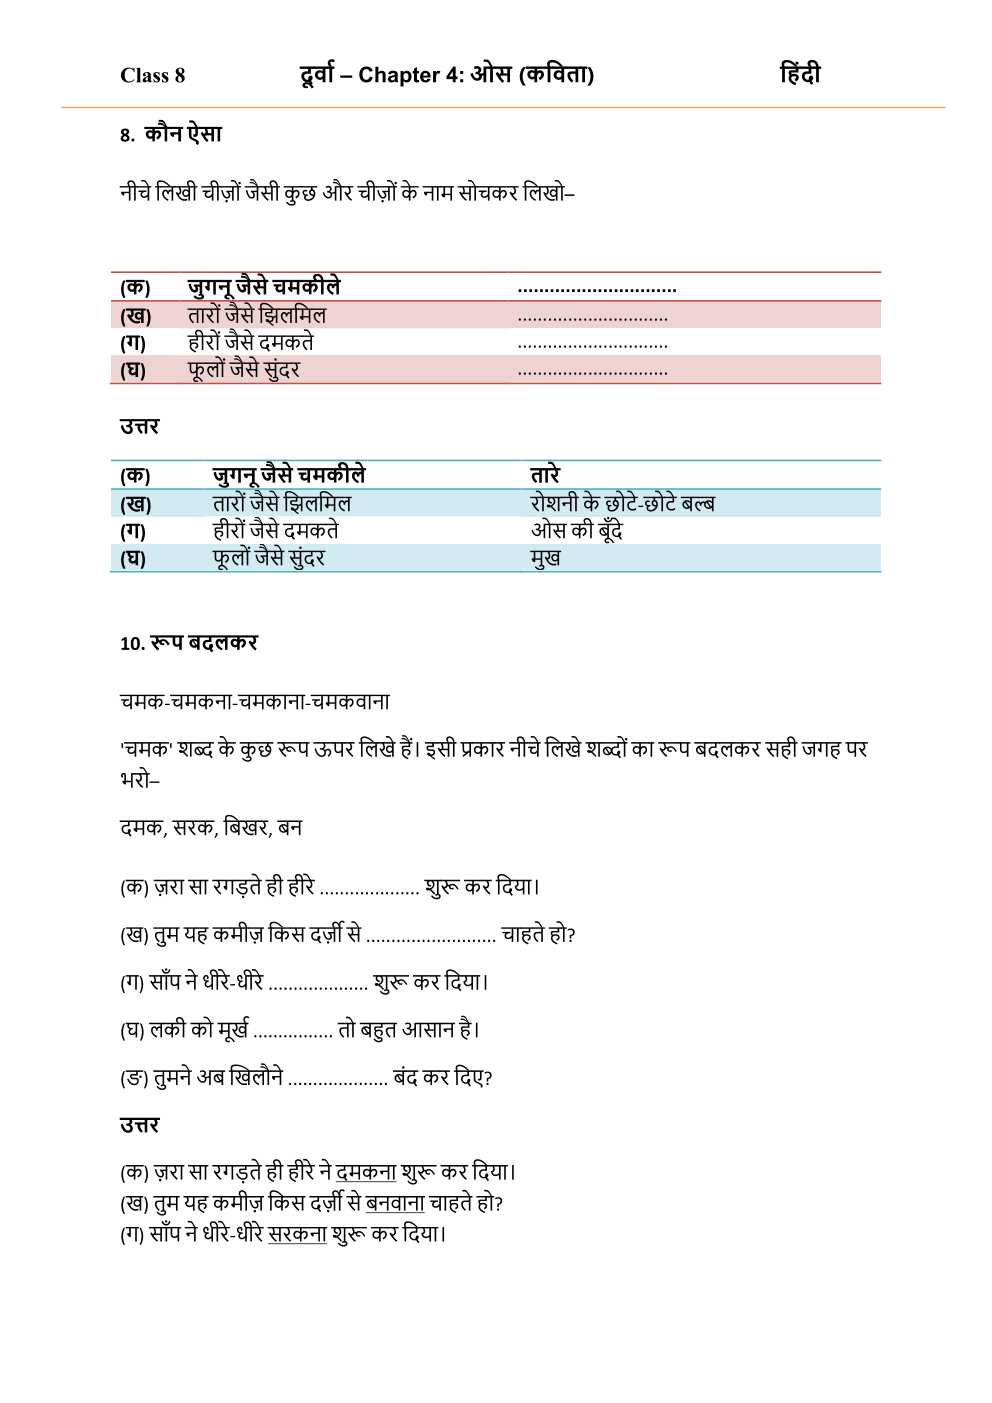 NCERT Solutions For Class 8 Hindi Durva Chapter 4